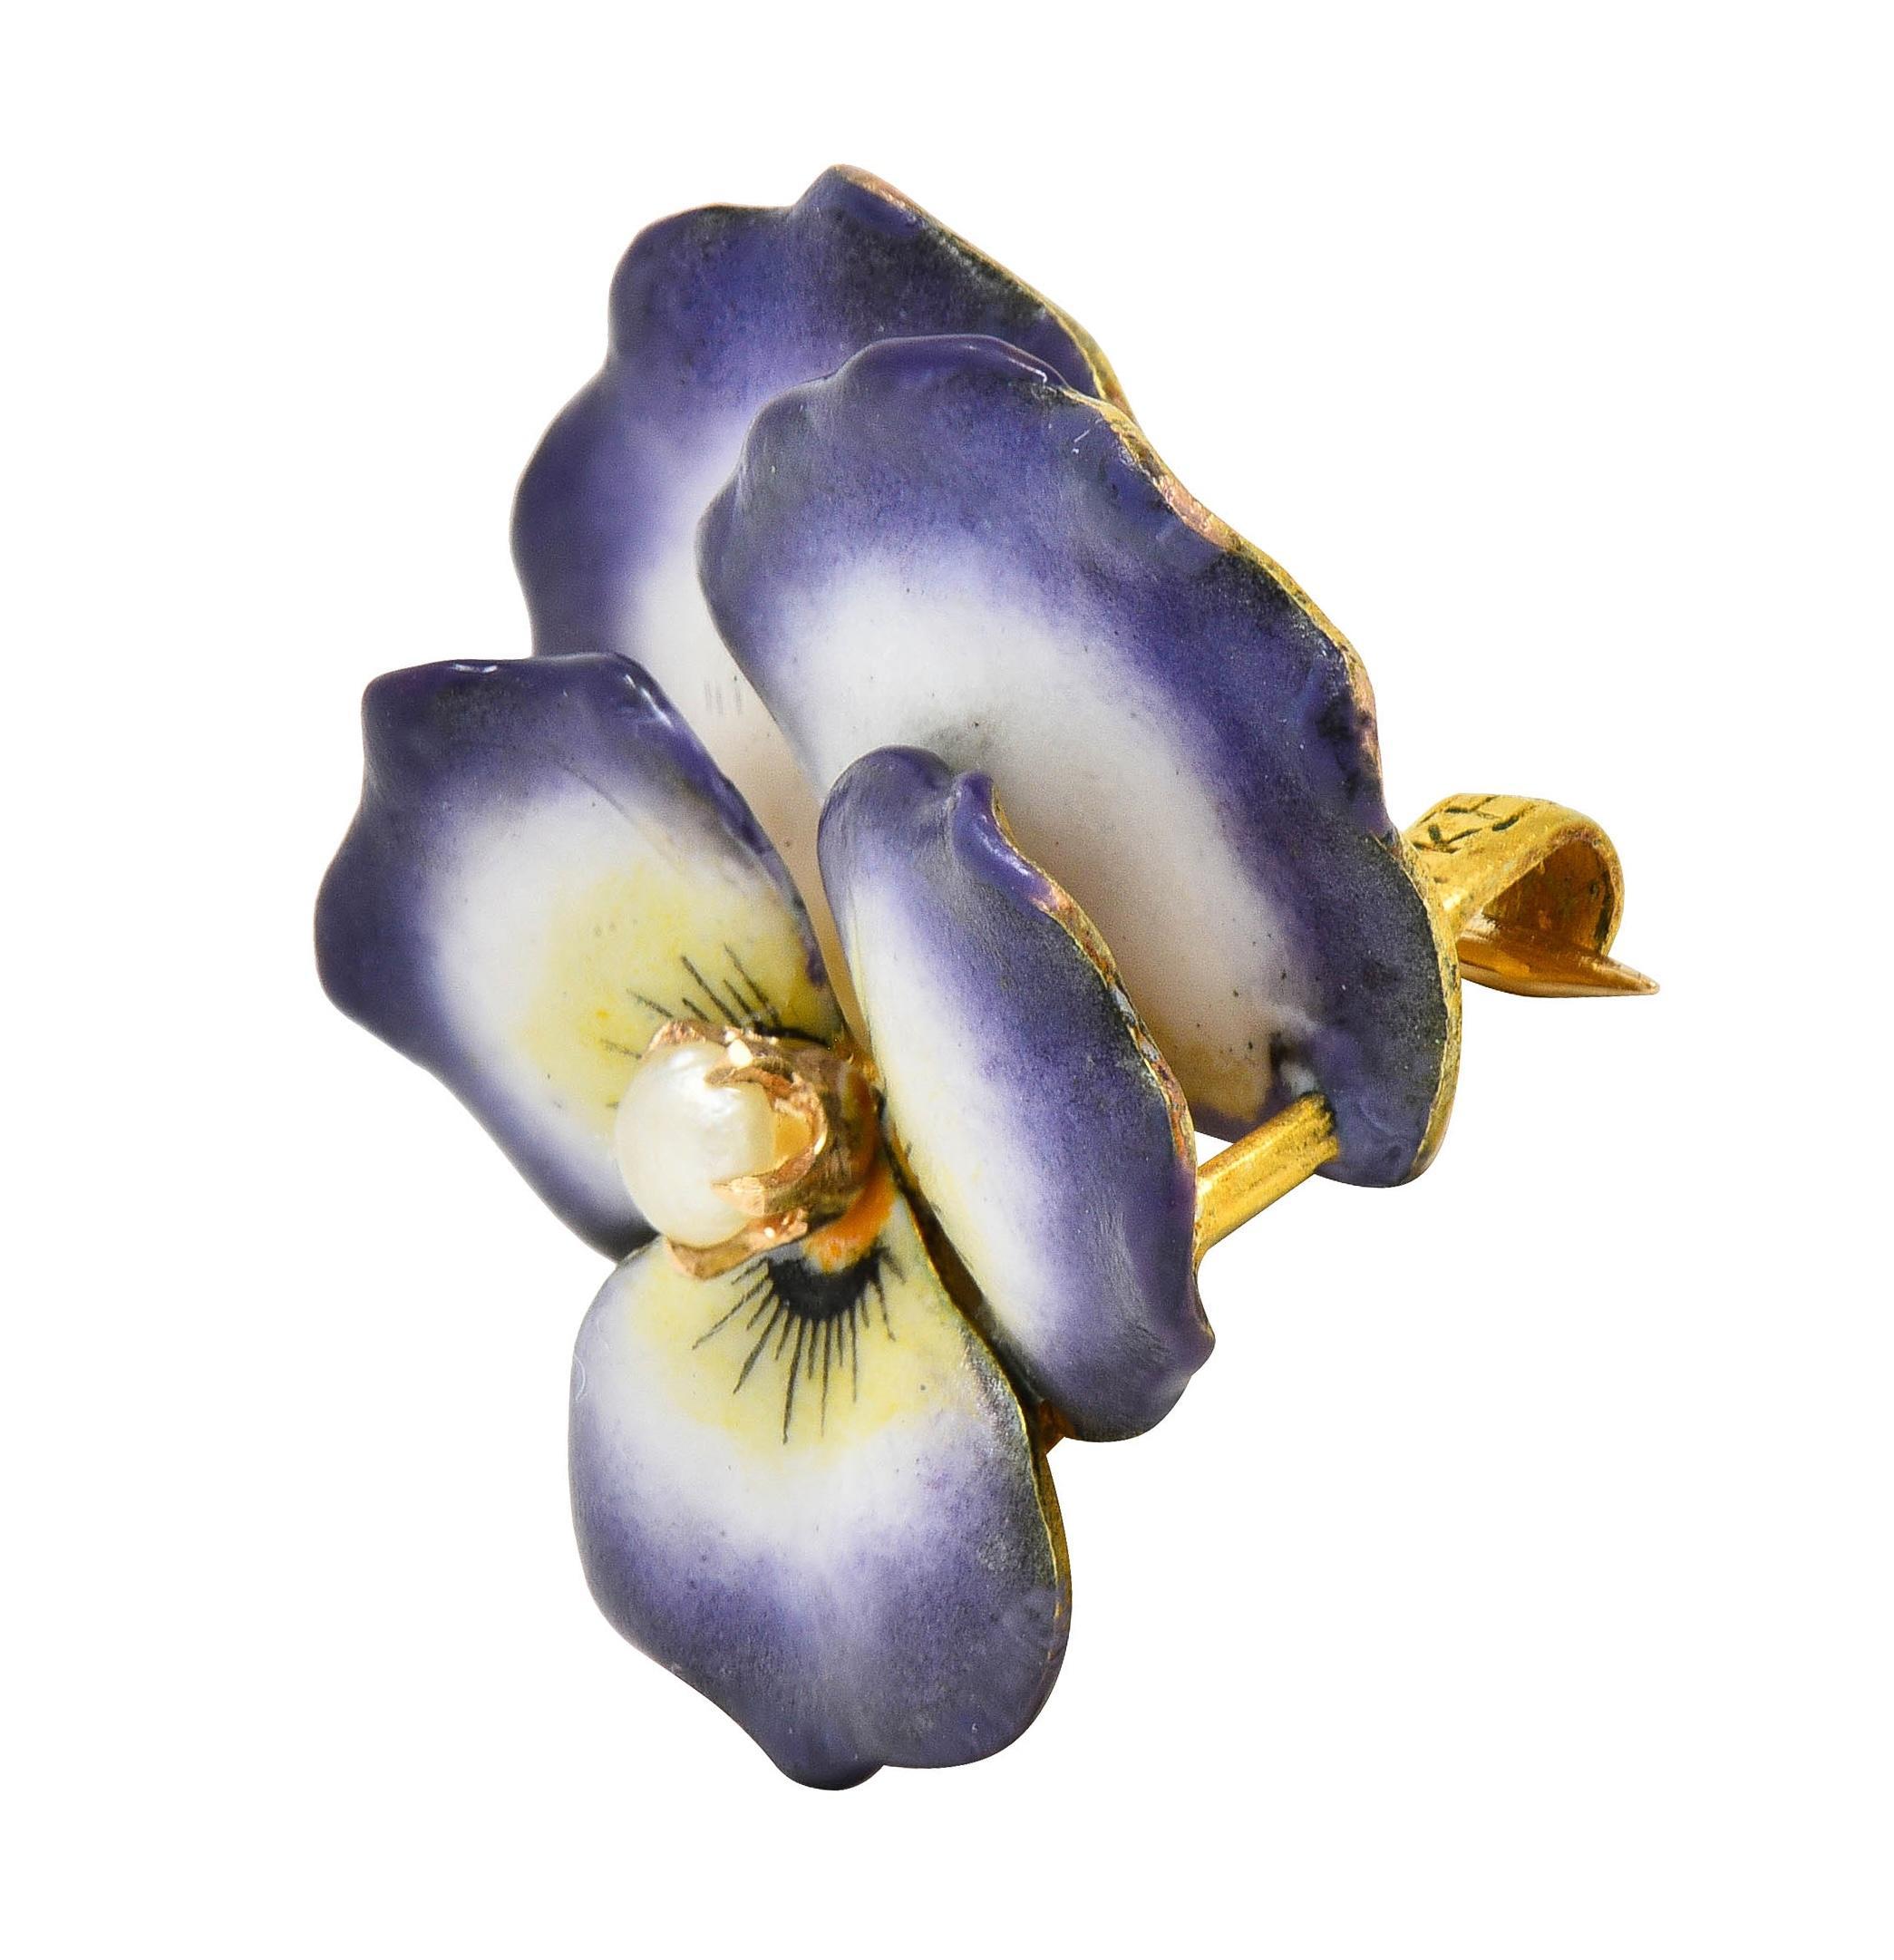 Designed as a dimensional pansy flower painted with enamel 
Opaque white, yellow, and purple with minimal loss 
Centering a 3.0 mm near-round button pearl
White with subtle iridescence
Completed by a hinged pinstem with looped closure 
Stamped for